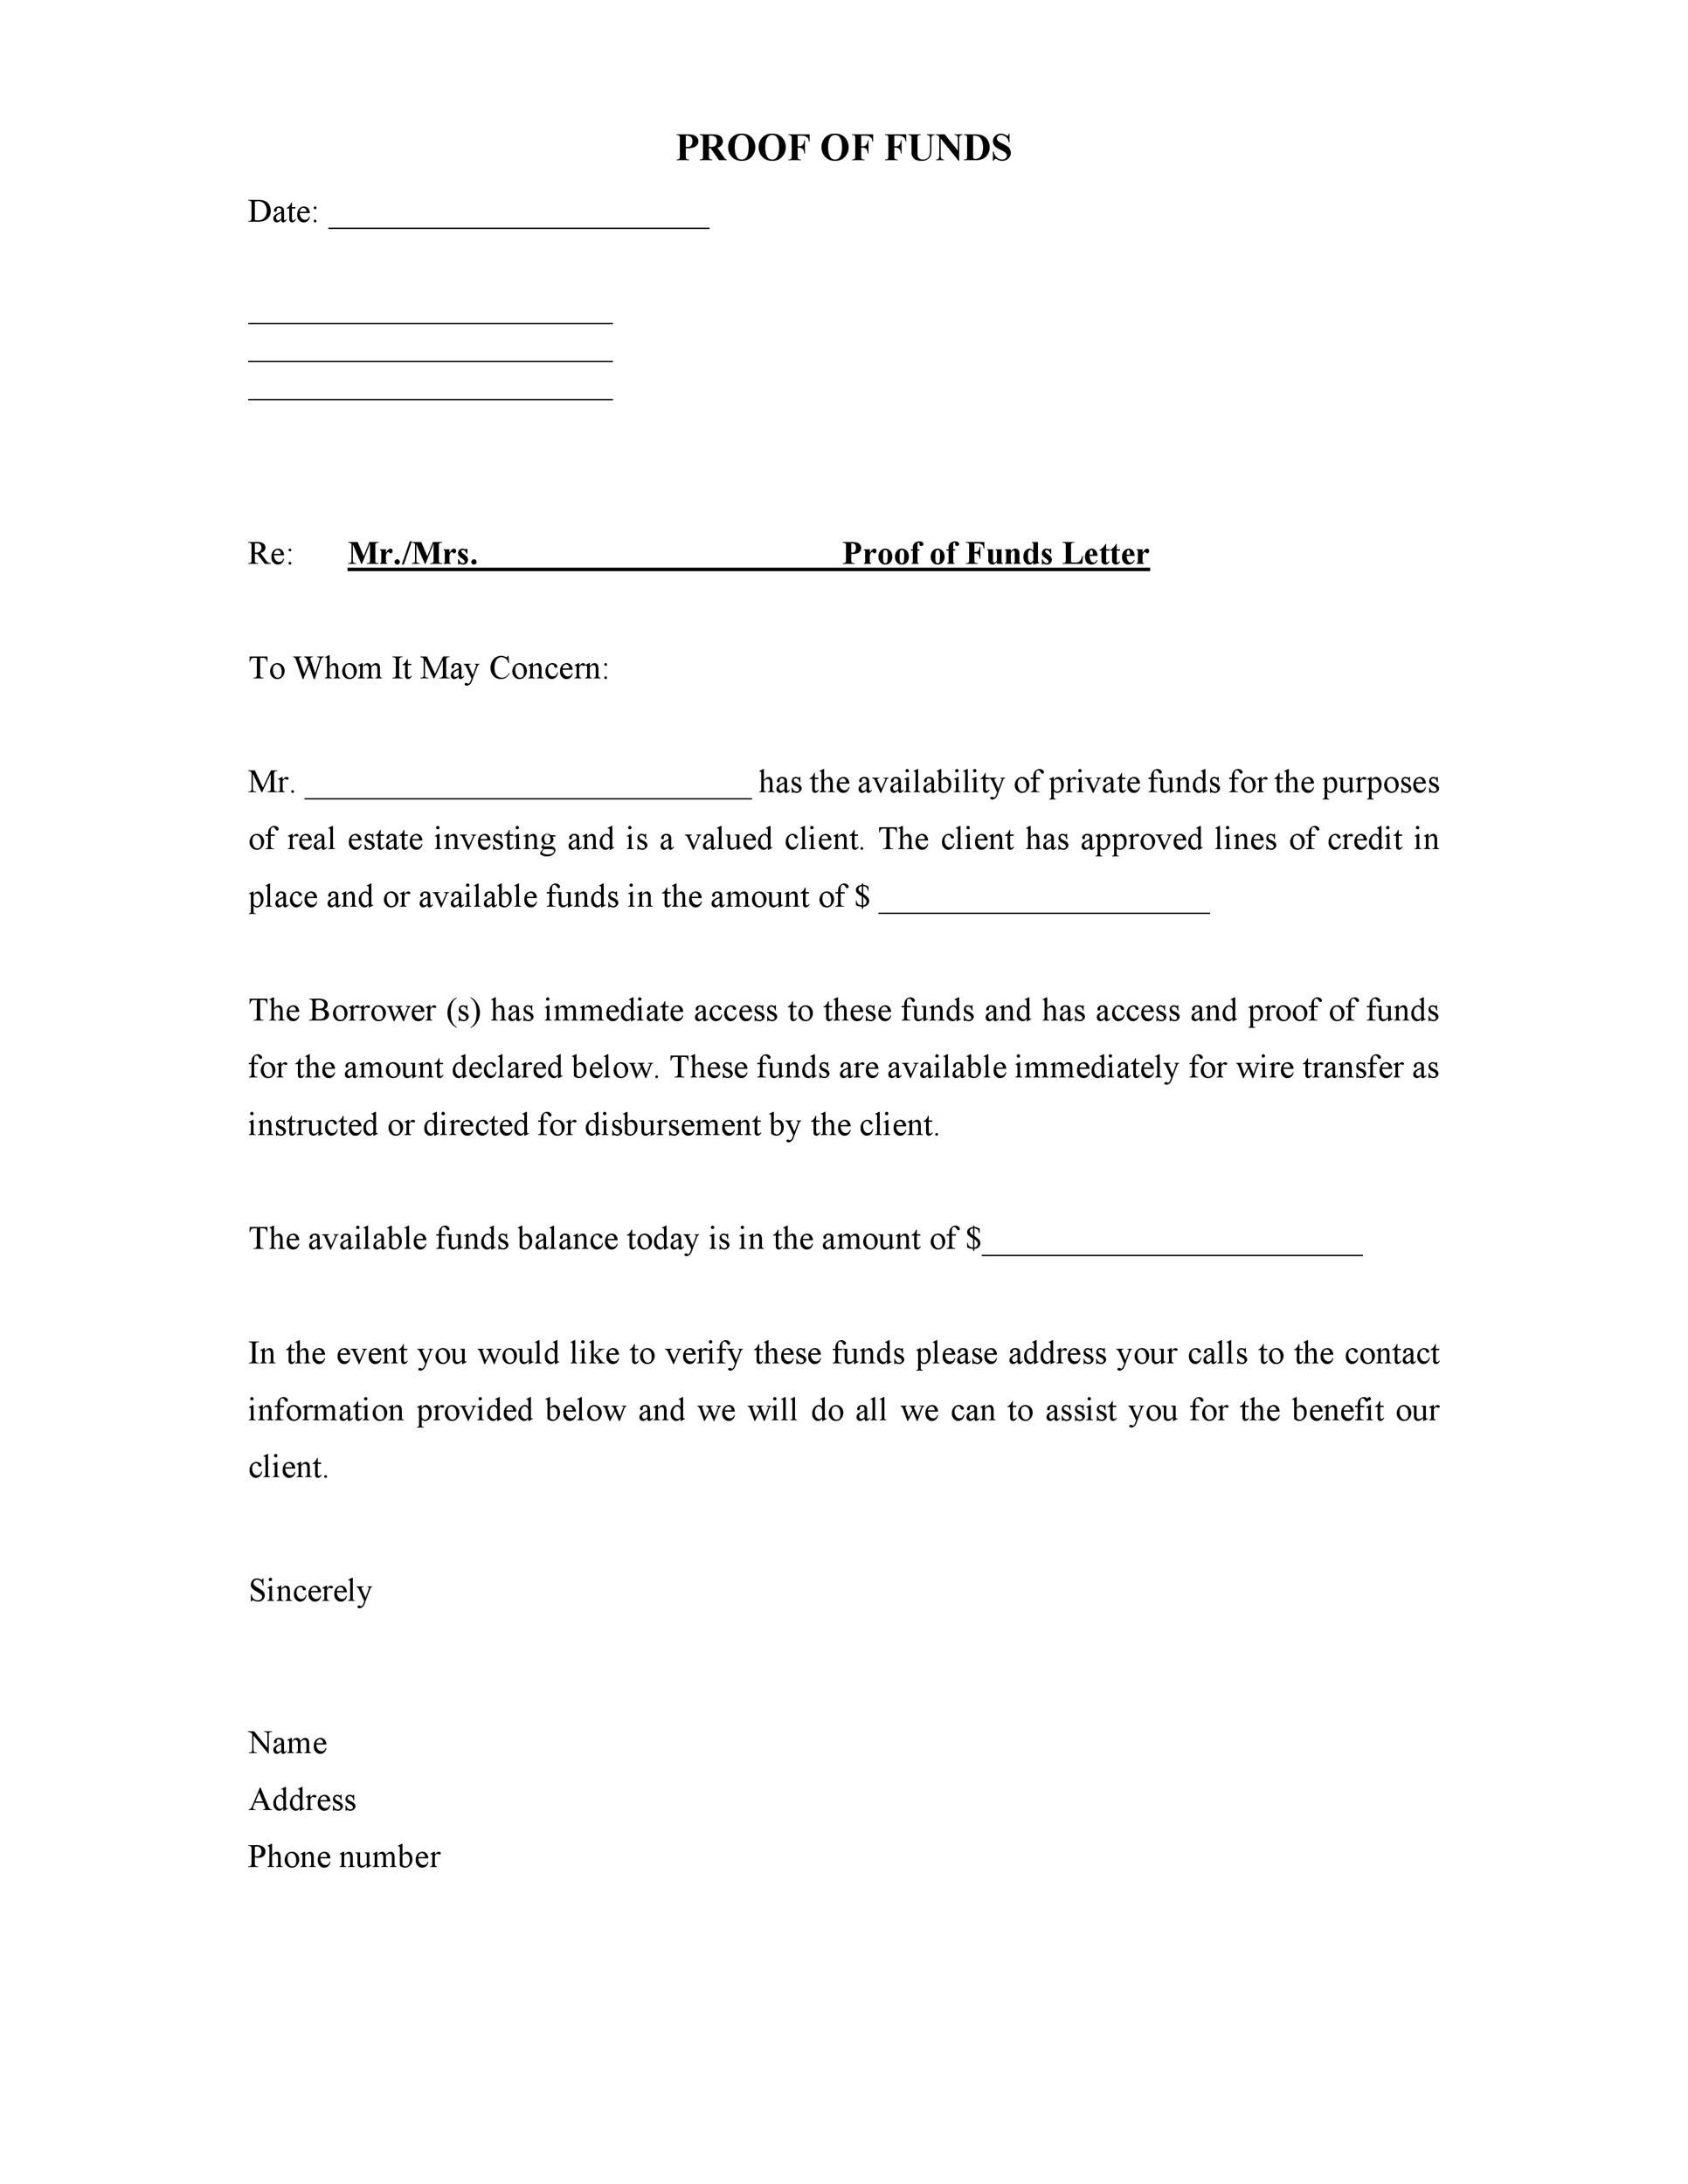 Free proof of funds letter template 02